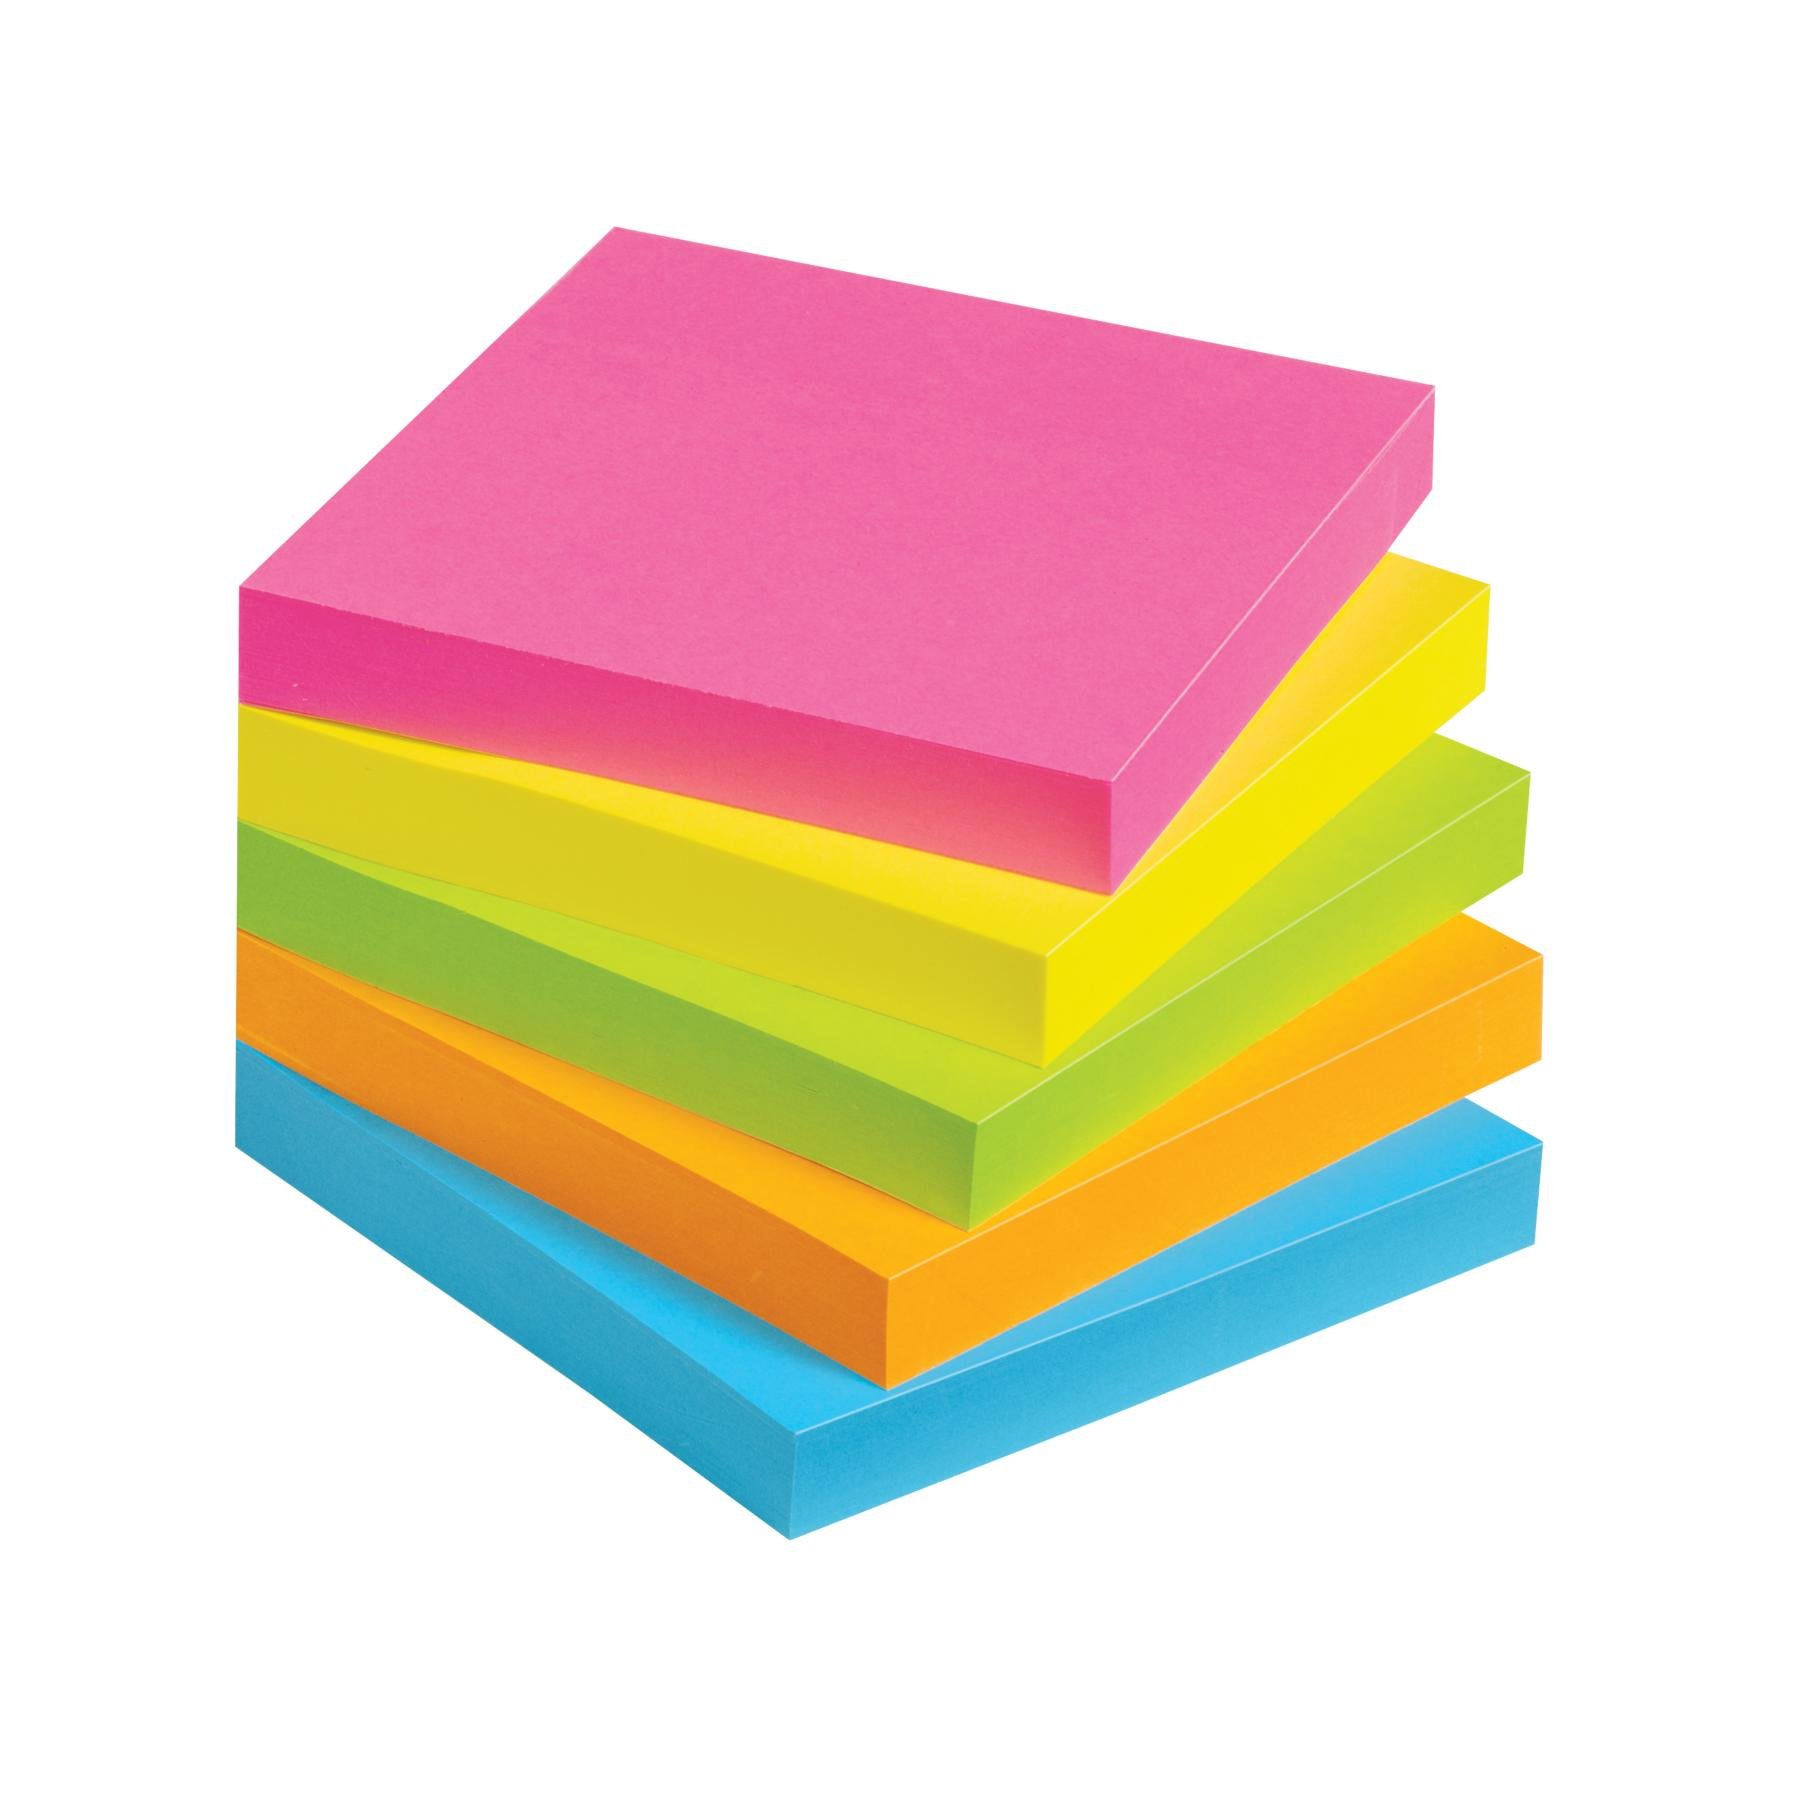 Avery Lay-Flat Sticky Notes, 3 x 3 Inches, Bright Colors, 450 ...